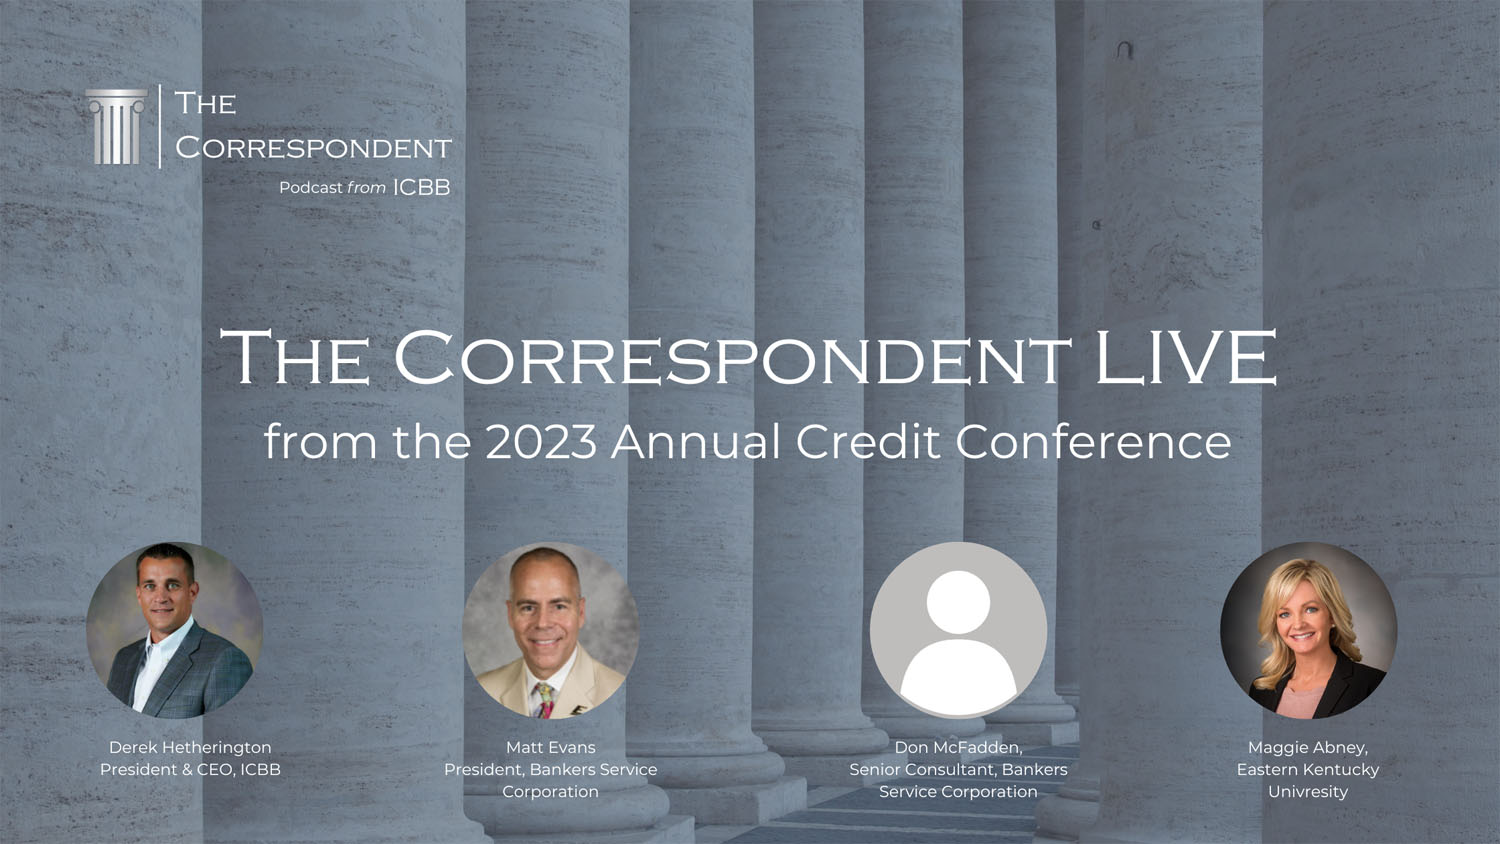 The Correspondent LIVE from the 2023 Annual Credit Conference